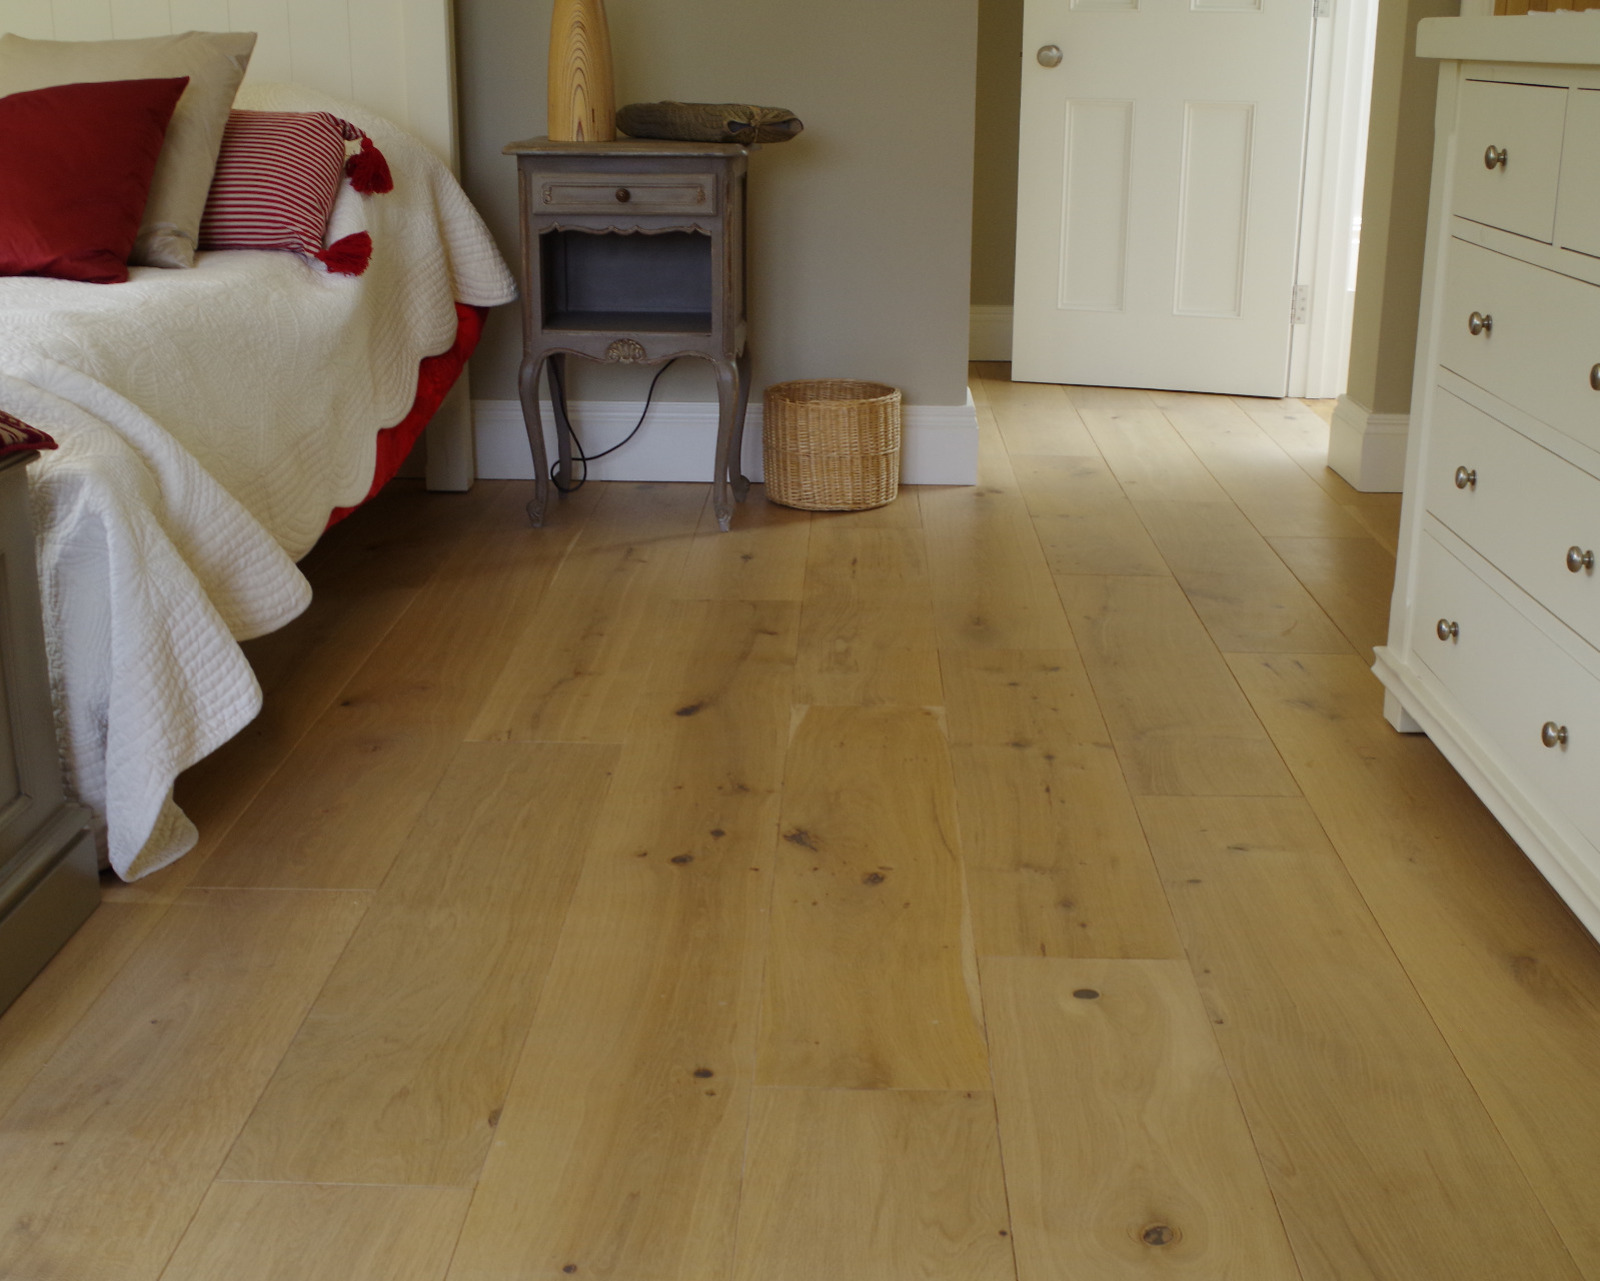 Flooring to compliment home